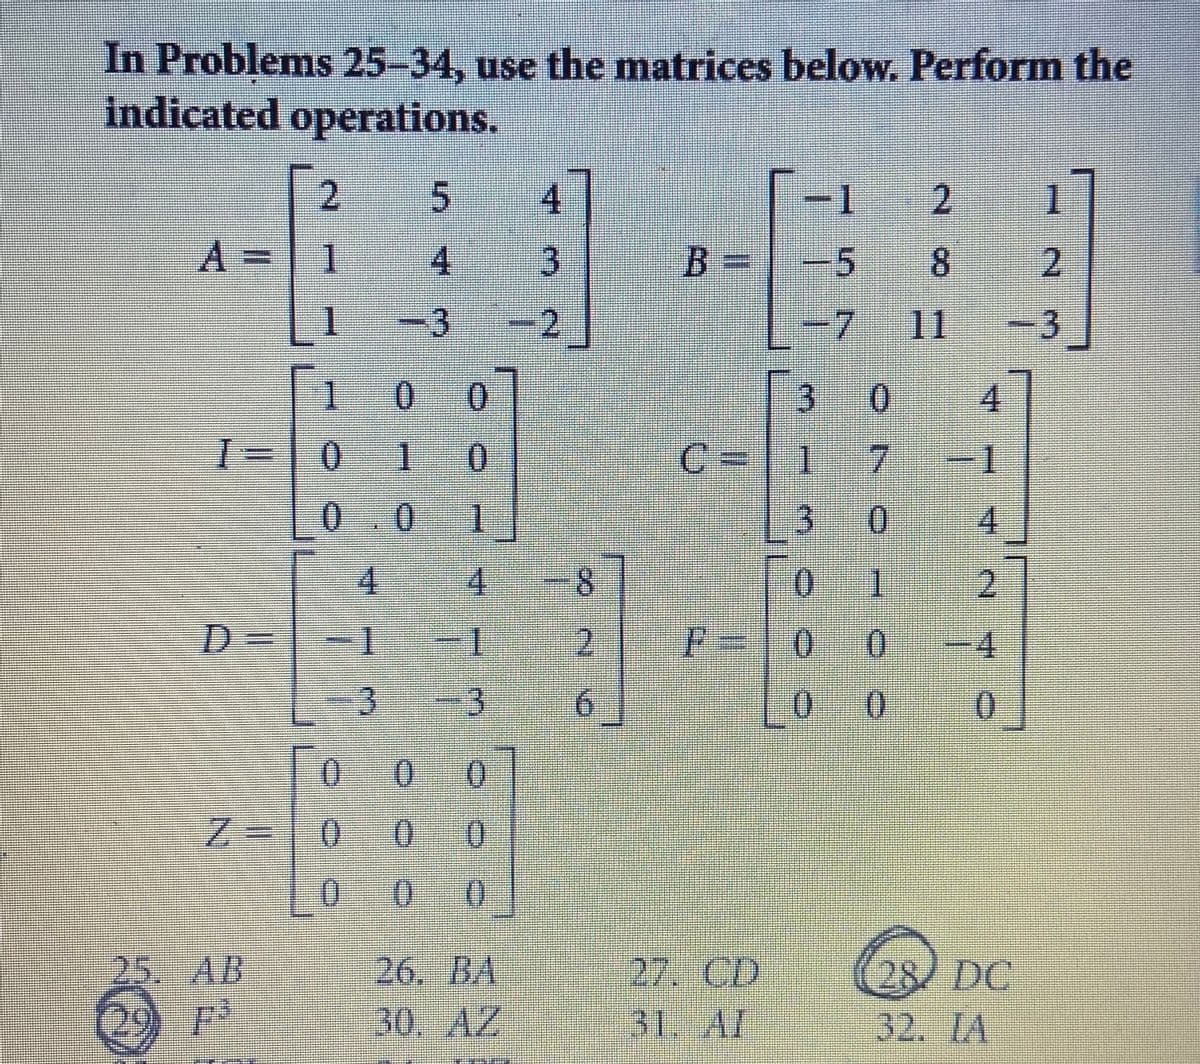 In Problems 25-34, use the matrices below. Perform the
indicated operations.
| 2
4.
-1
1
A%3D
1
4
B=|-5
8.
2.
1
-3
.
2,
7 11
-3
1.
0 0
0.
4
0.
1
0.
C=|1
0.
0.
1
4
4.
4.
0.
台
D%3D
2
F=10 0
-4
3 -3
9.
0.
0.
0.
0.
%=
0.
0.
25. AB
26. BA
27. CD
28/ DC
32. IA
29
30. AZ 31. AI
2.
3.
